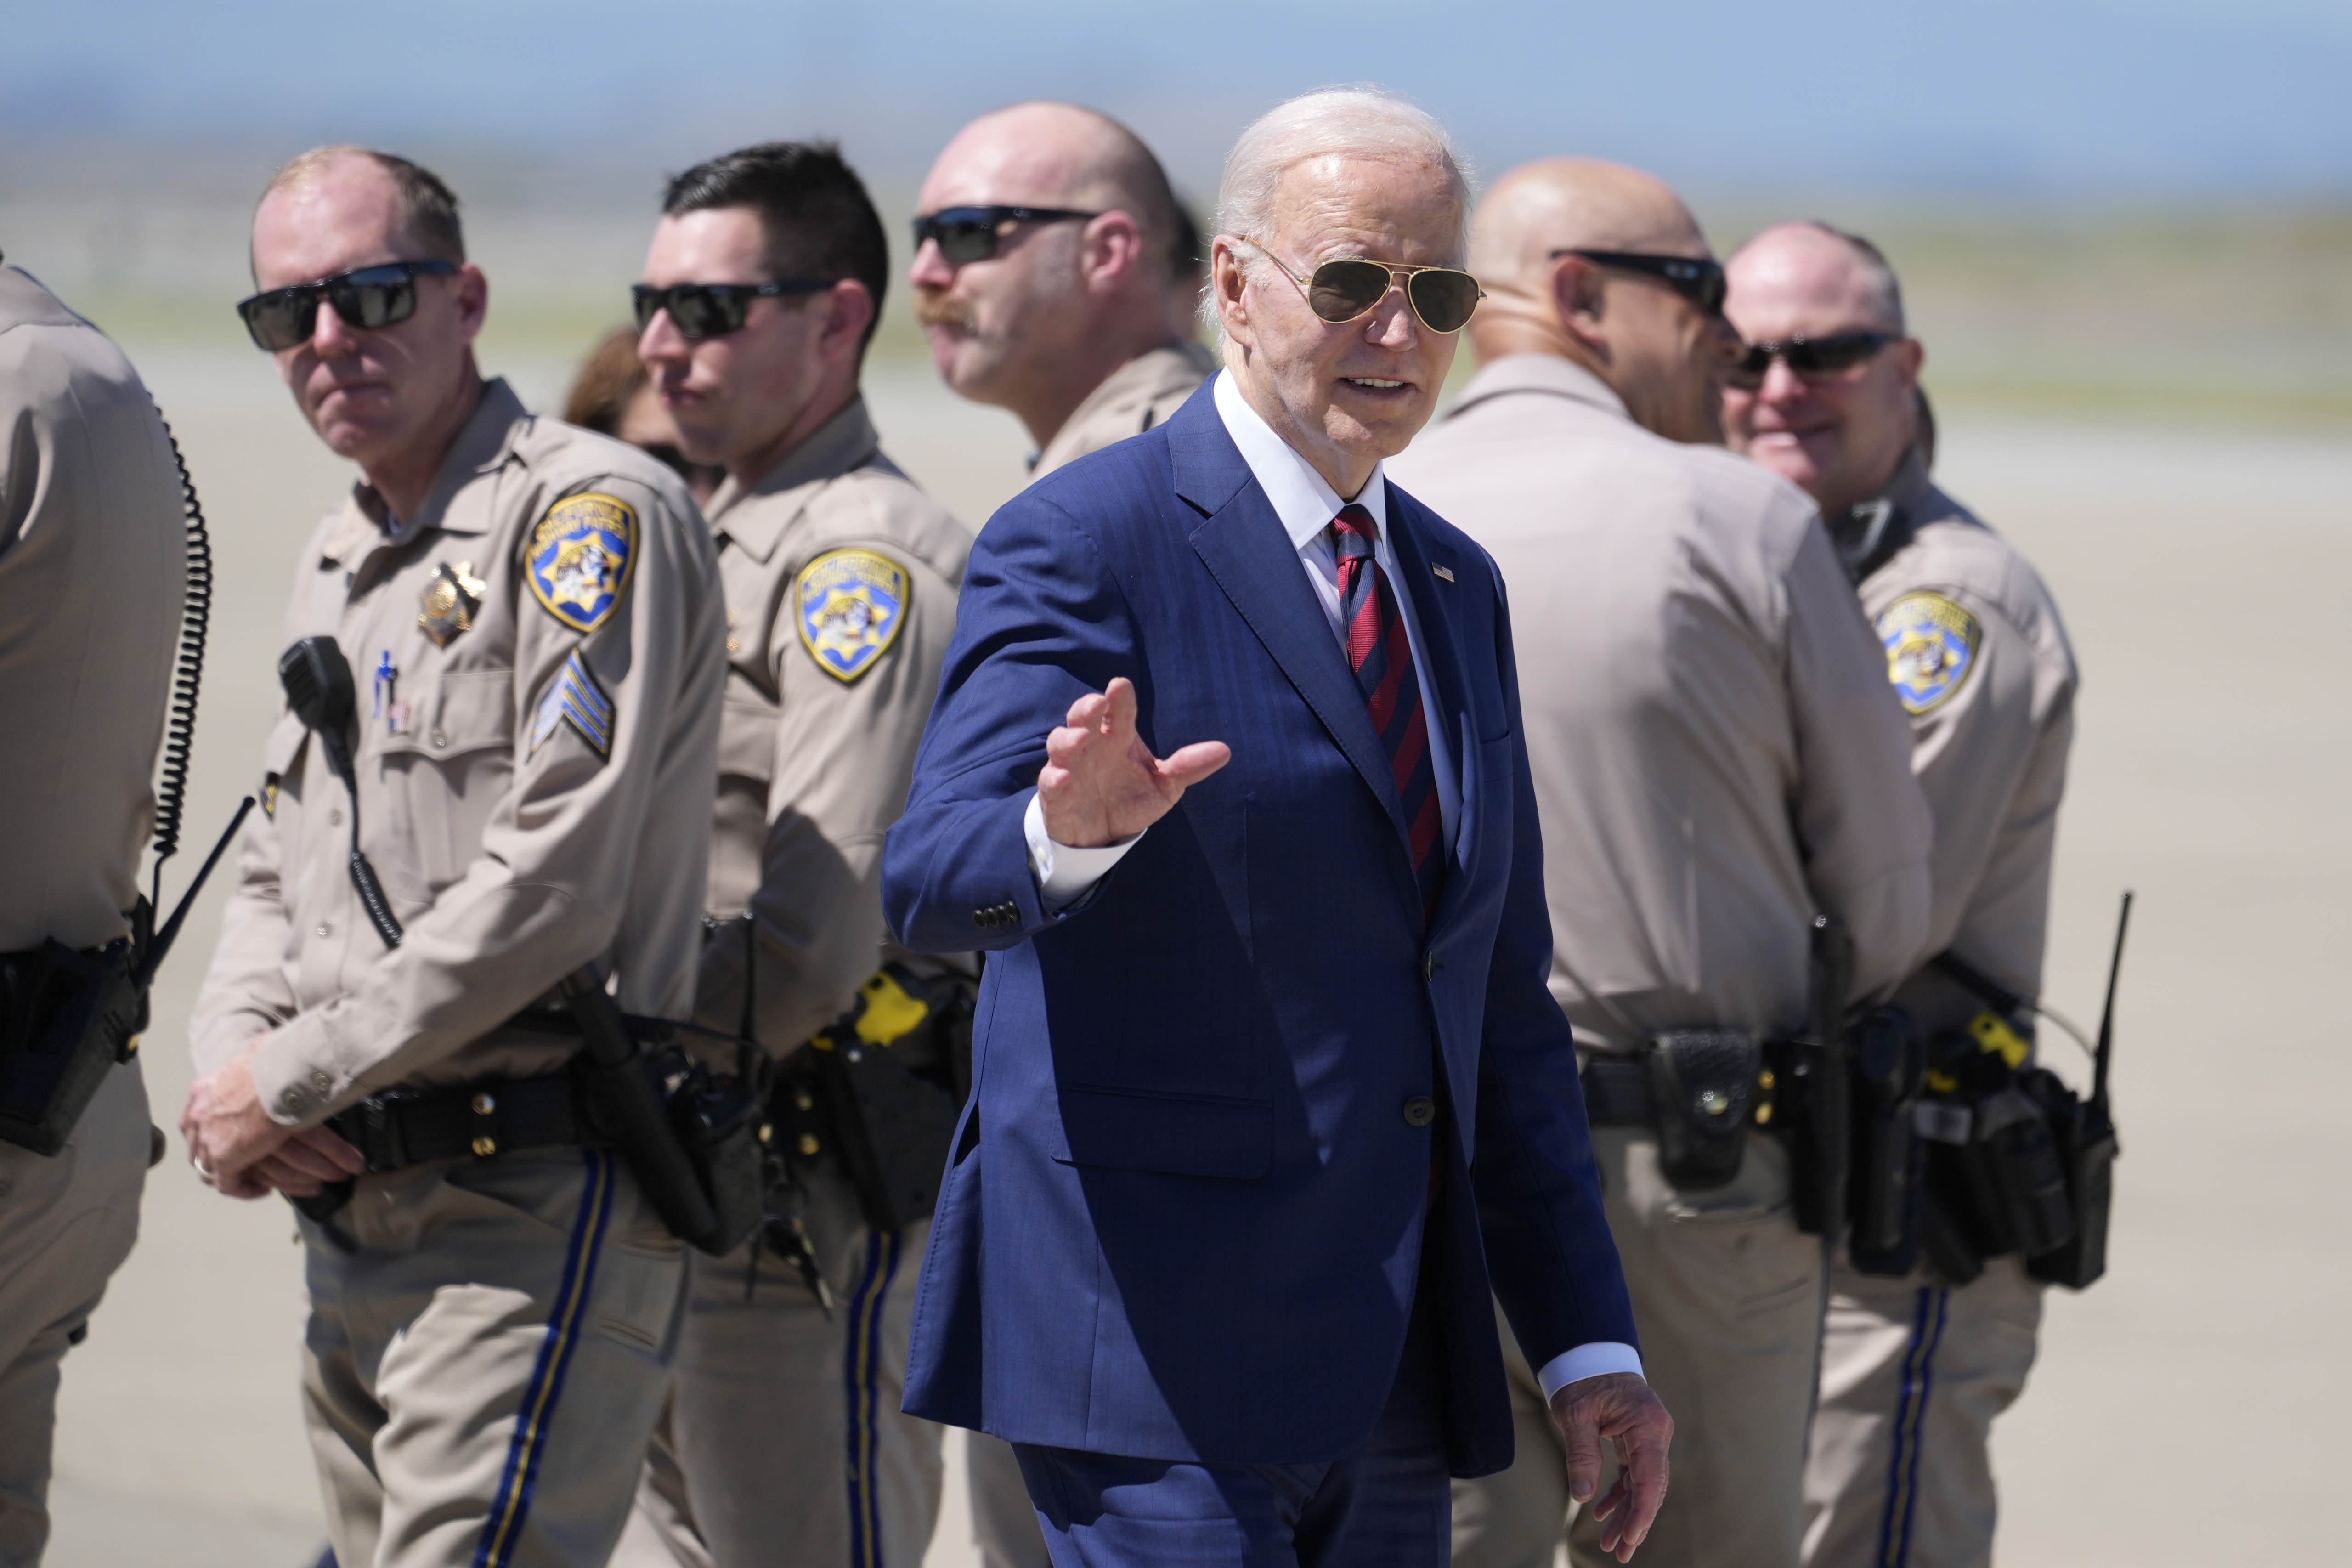 Biden raises millions in the Bay Area as he says his campaign is underestimated